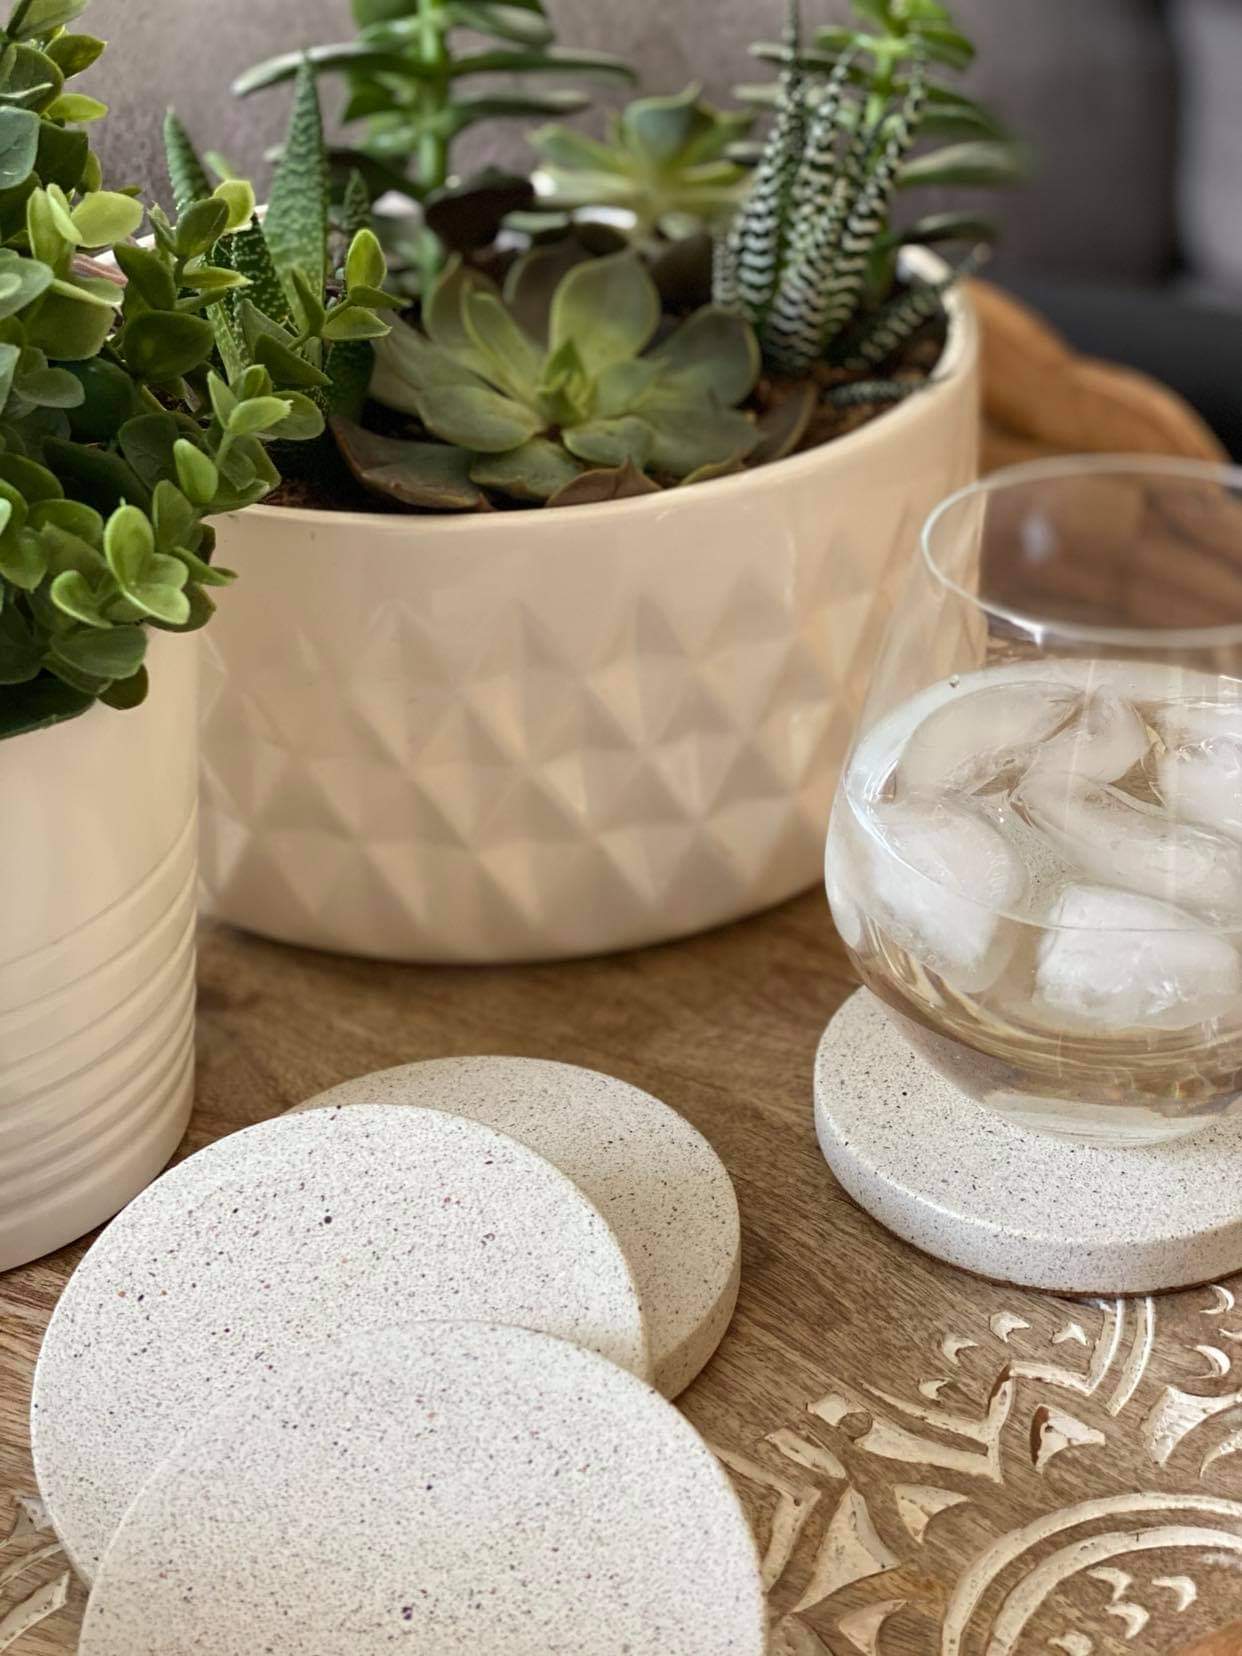 Set of 4 sparkling white concrete stone coasters, featuring one with a glass of water and ice, complemented by two green plants in minimalist white porcelain planters.